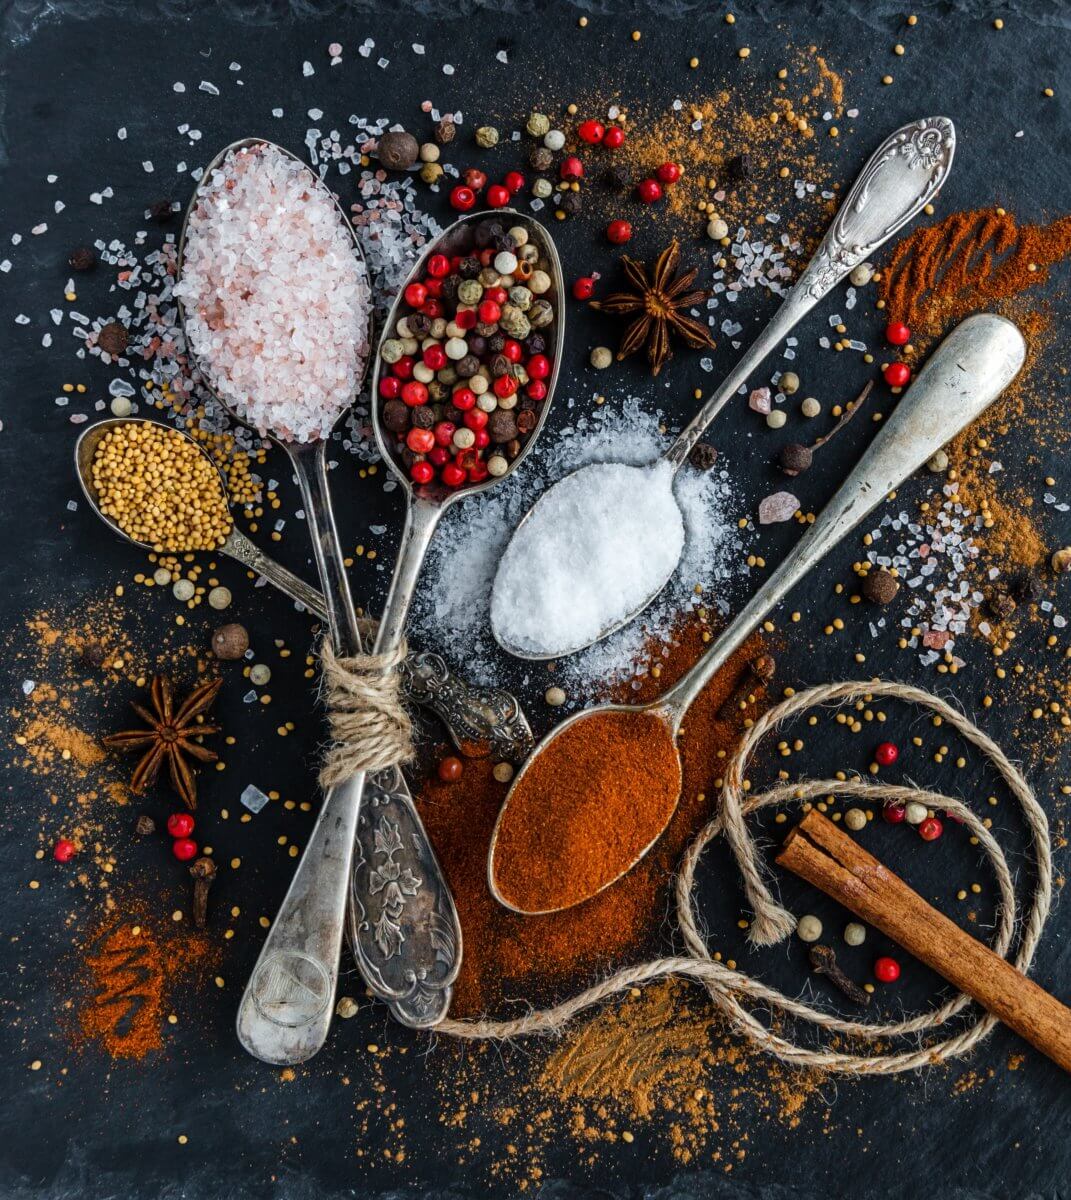 A picture of spices and spoons